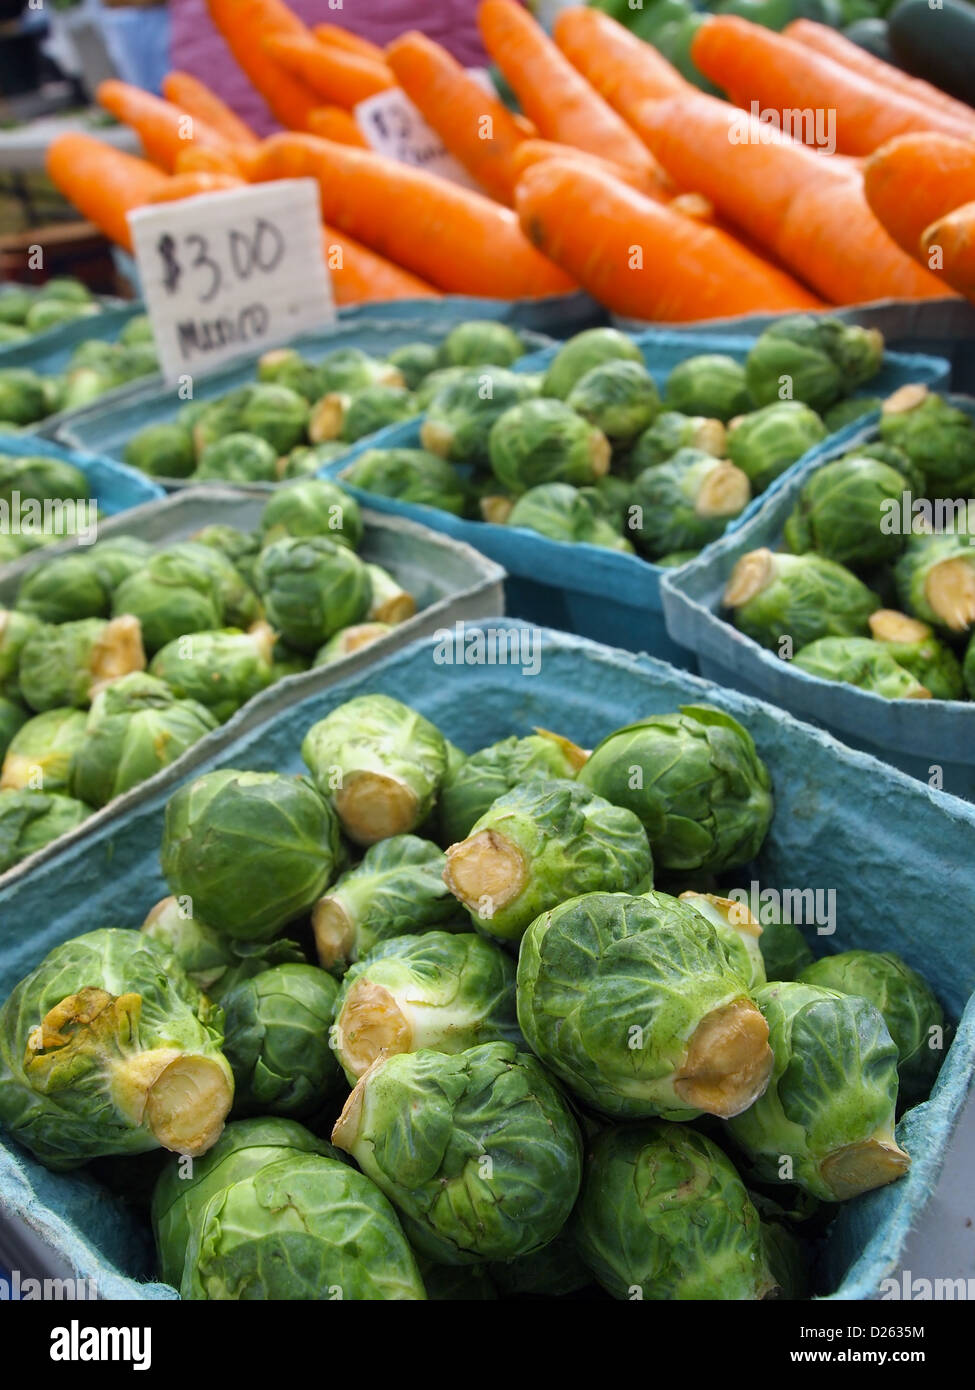 Fresh, green, organic brussels sprout for sale at a local farmer's markets, with carrots in the background. Stock Photo